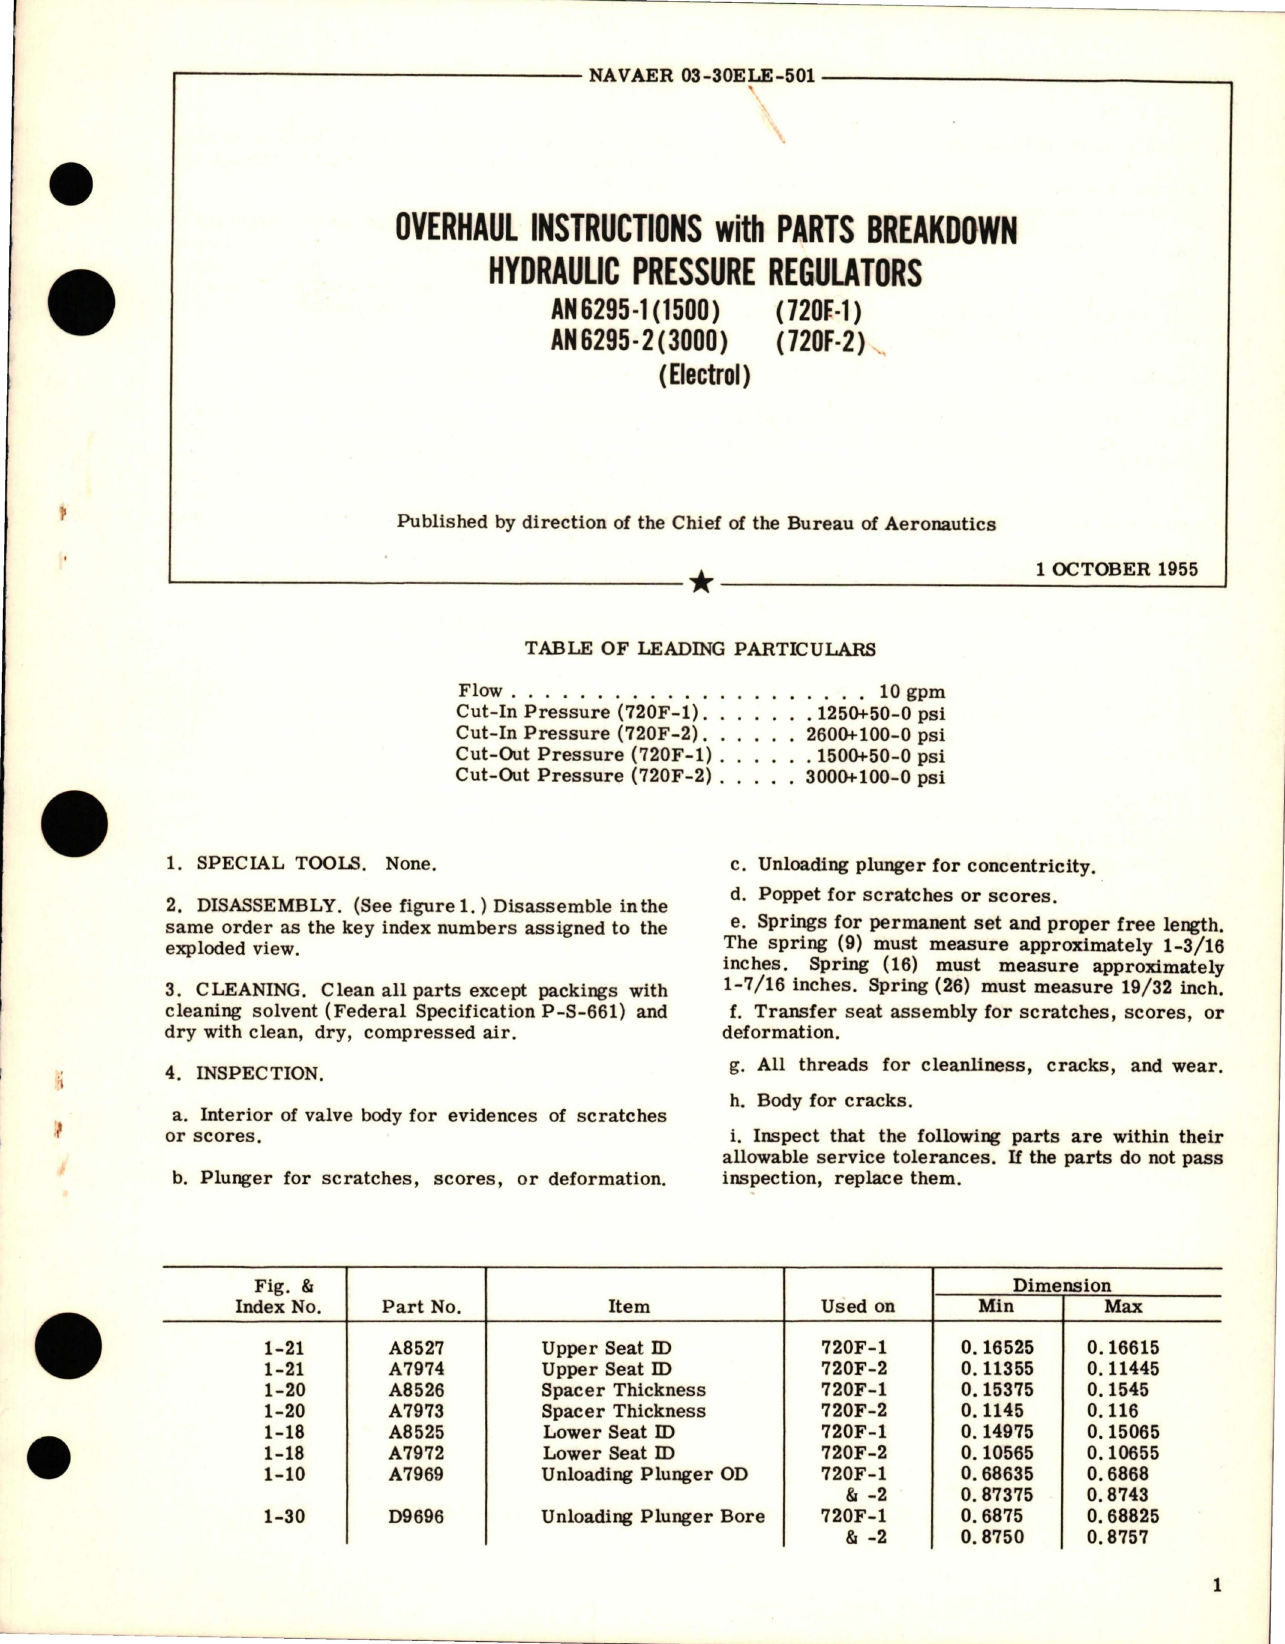 Sample page 1 from AirCorps Library document: Overhaul Instructions with Parts Breakdown for Hydraulic Pressure Regulators - AN6295-1 and AN6295-2